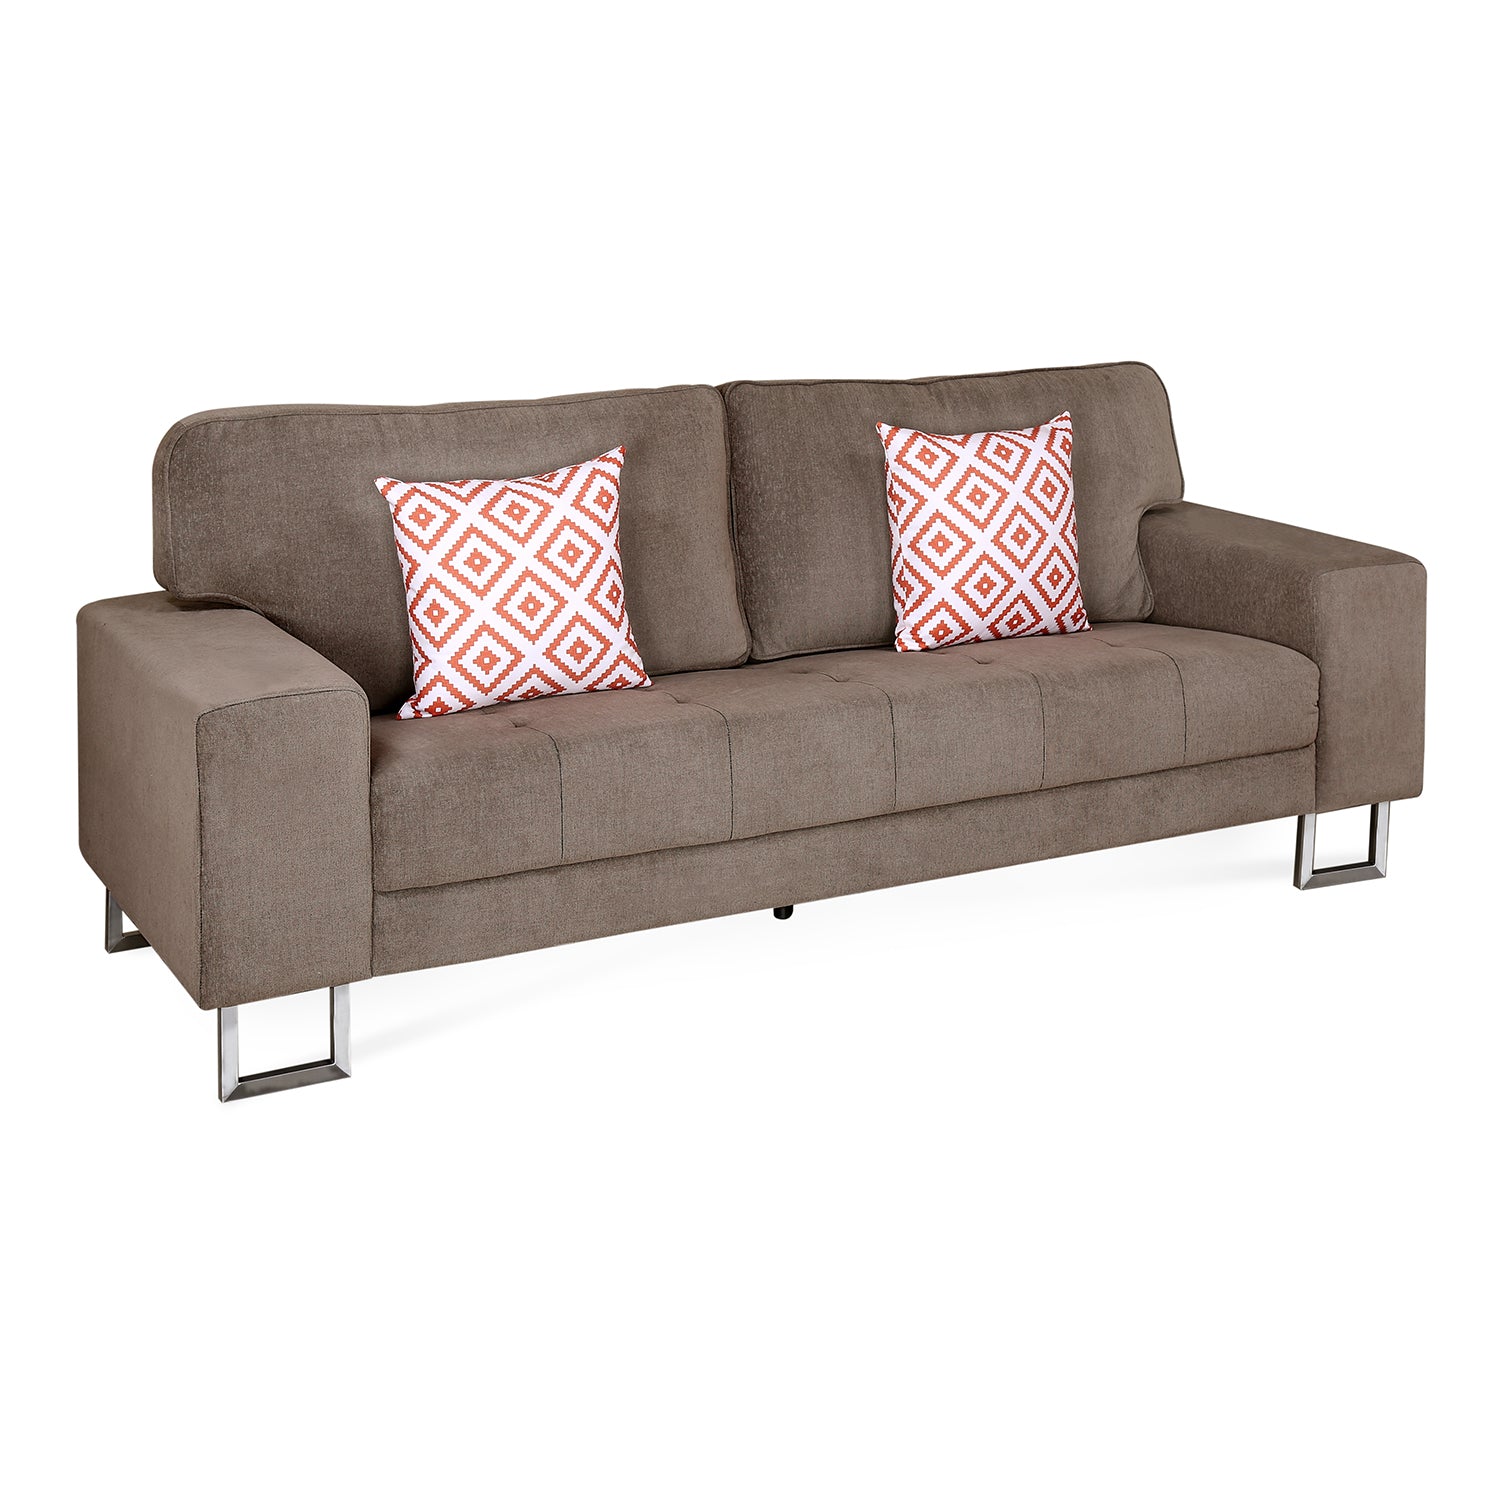 Chicago 3 Seater Sofa (Brown)